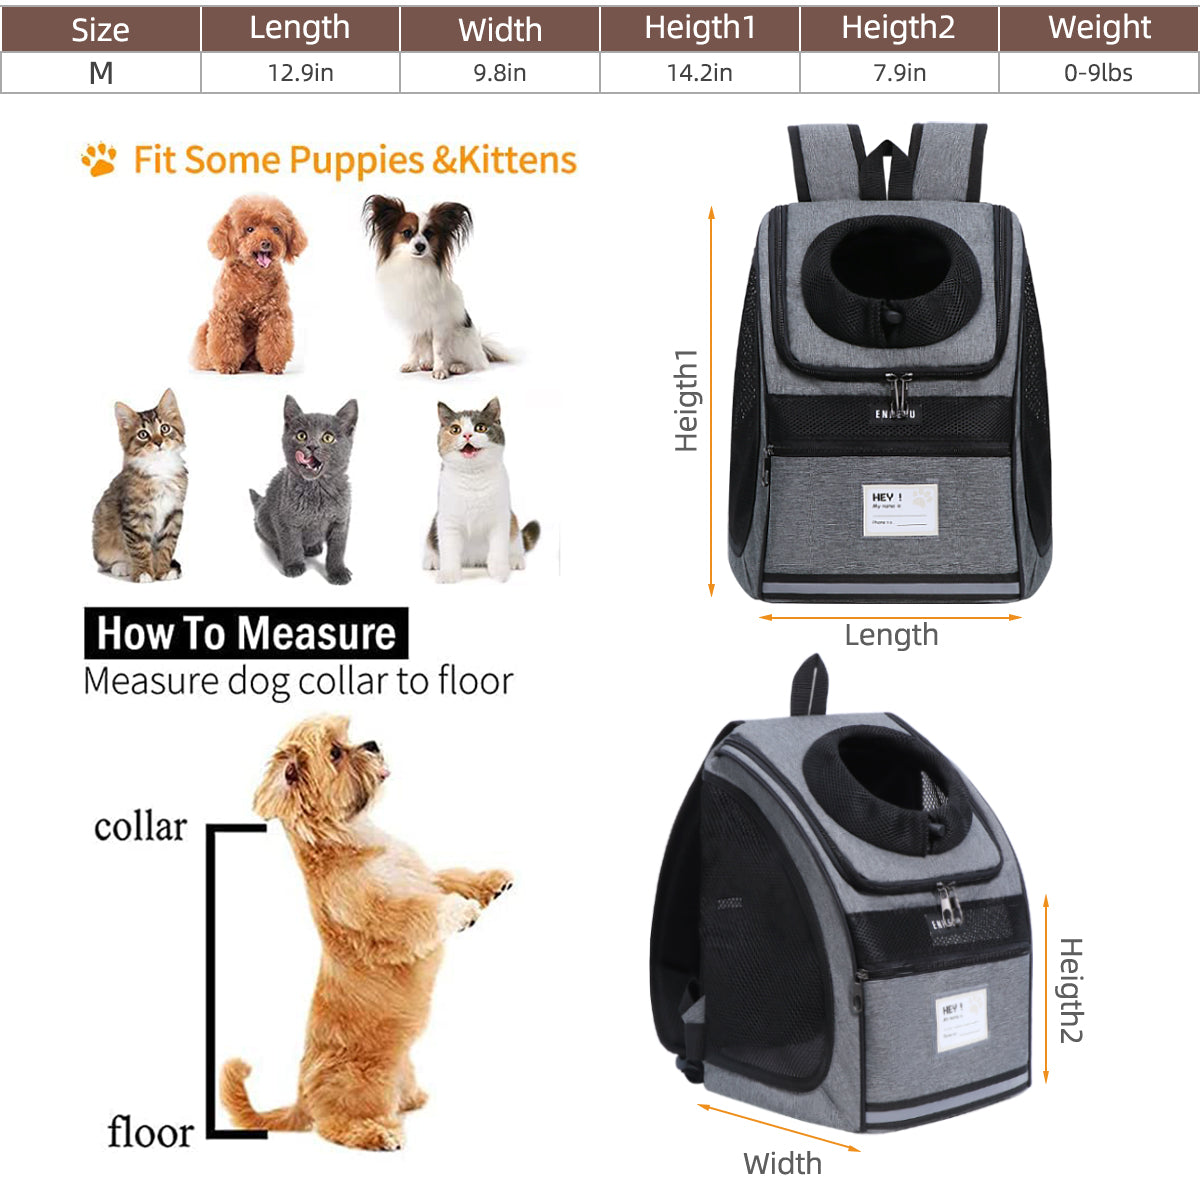 The second generation mesh pet backpack